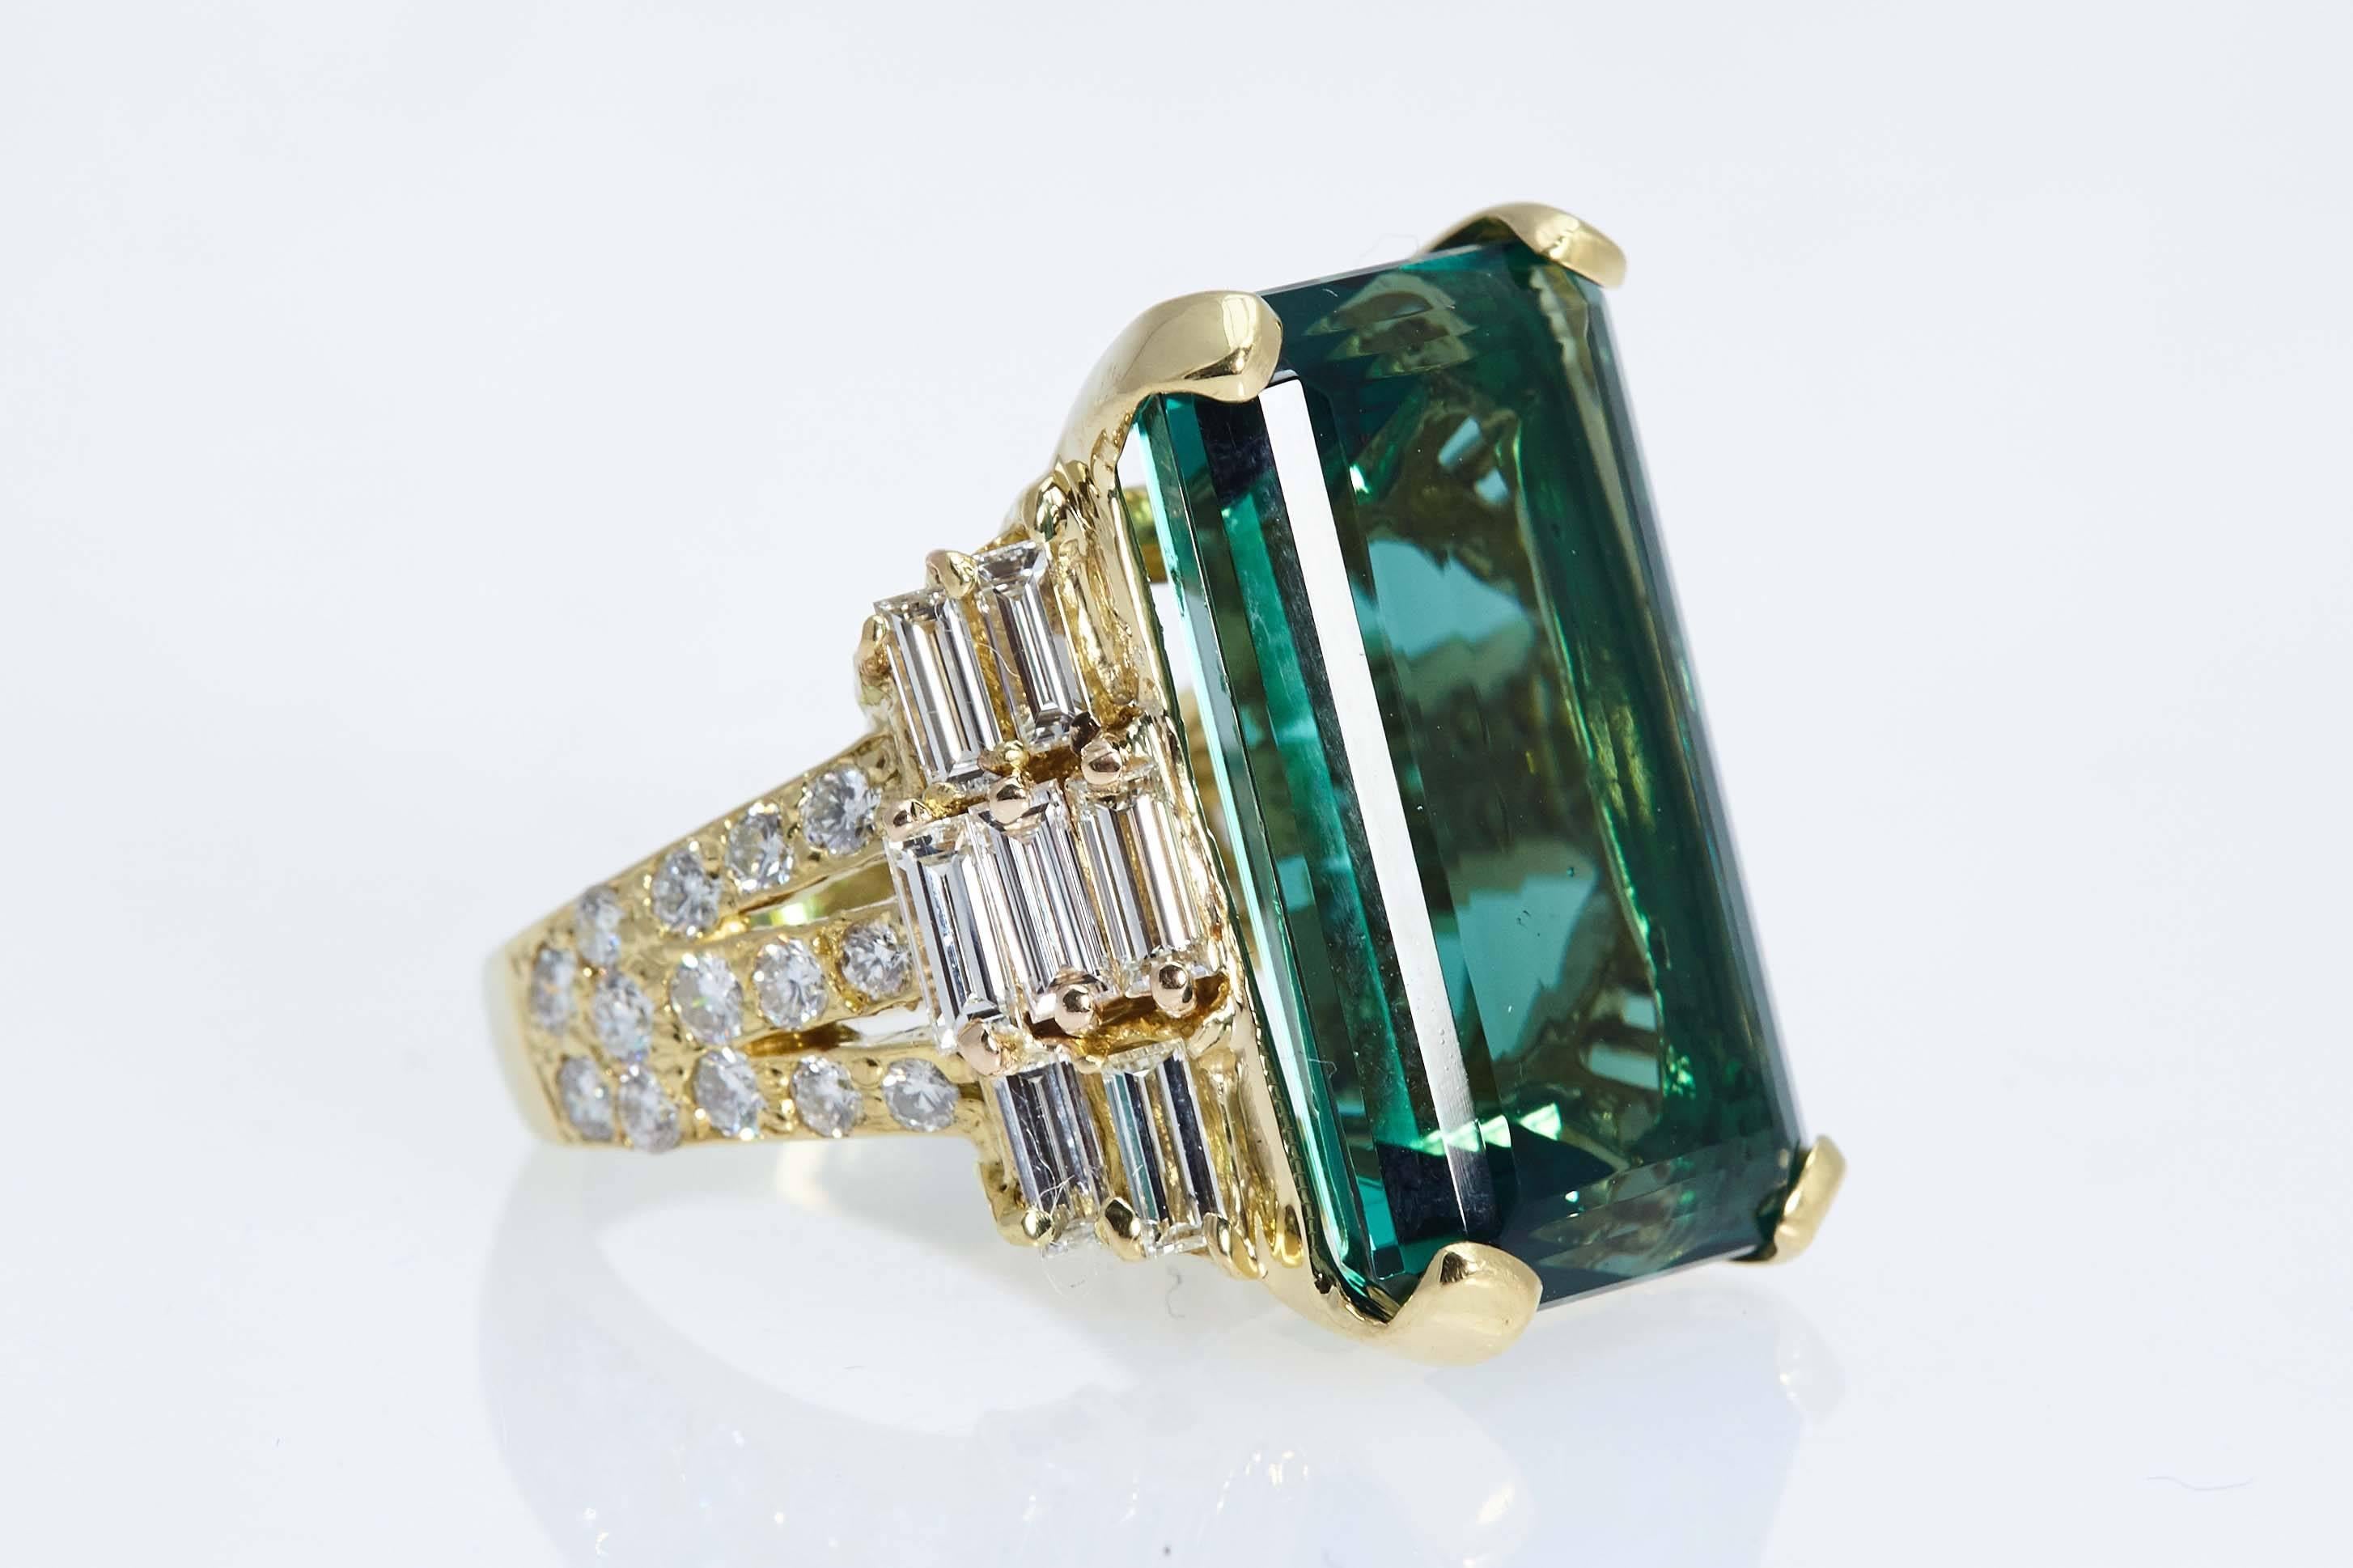 Emerald cut Tourmaline ring in eighteen karat yellow gold with diamonds on the sides. The tourmaline weighs 22.98 carats and the ring contains 14 straight baguette shaped diamonds weighing 1.91 carats and 28 round diamonds weighing 1.01 carats. The